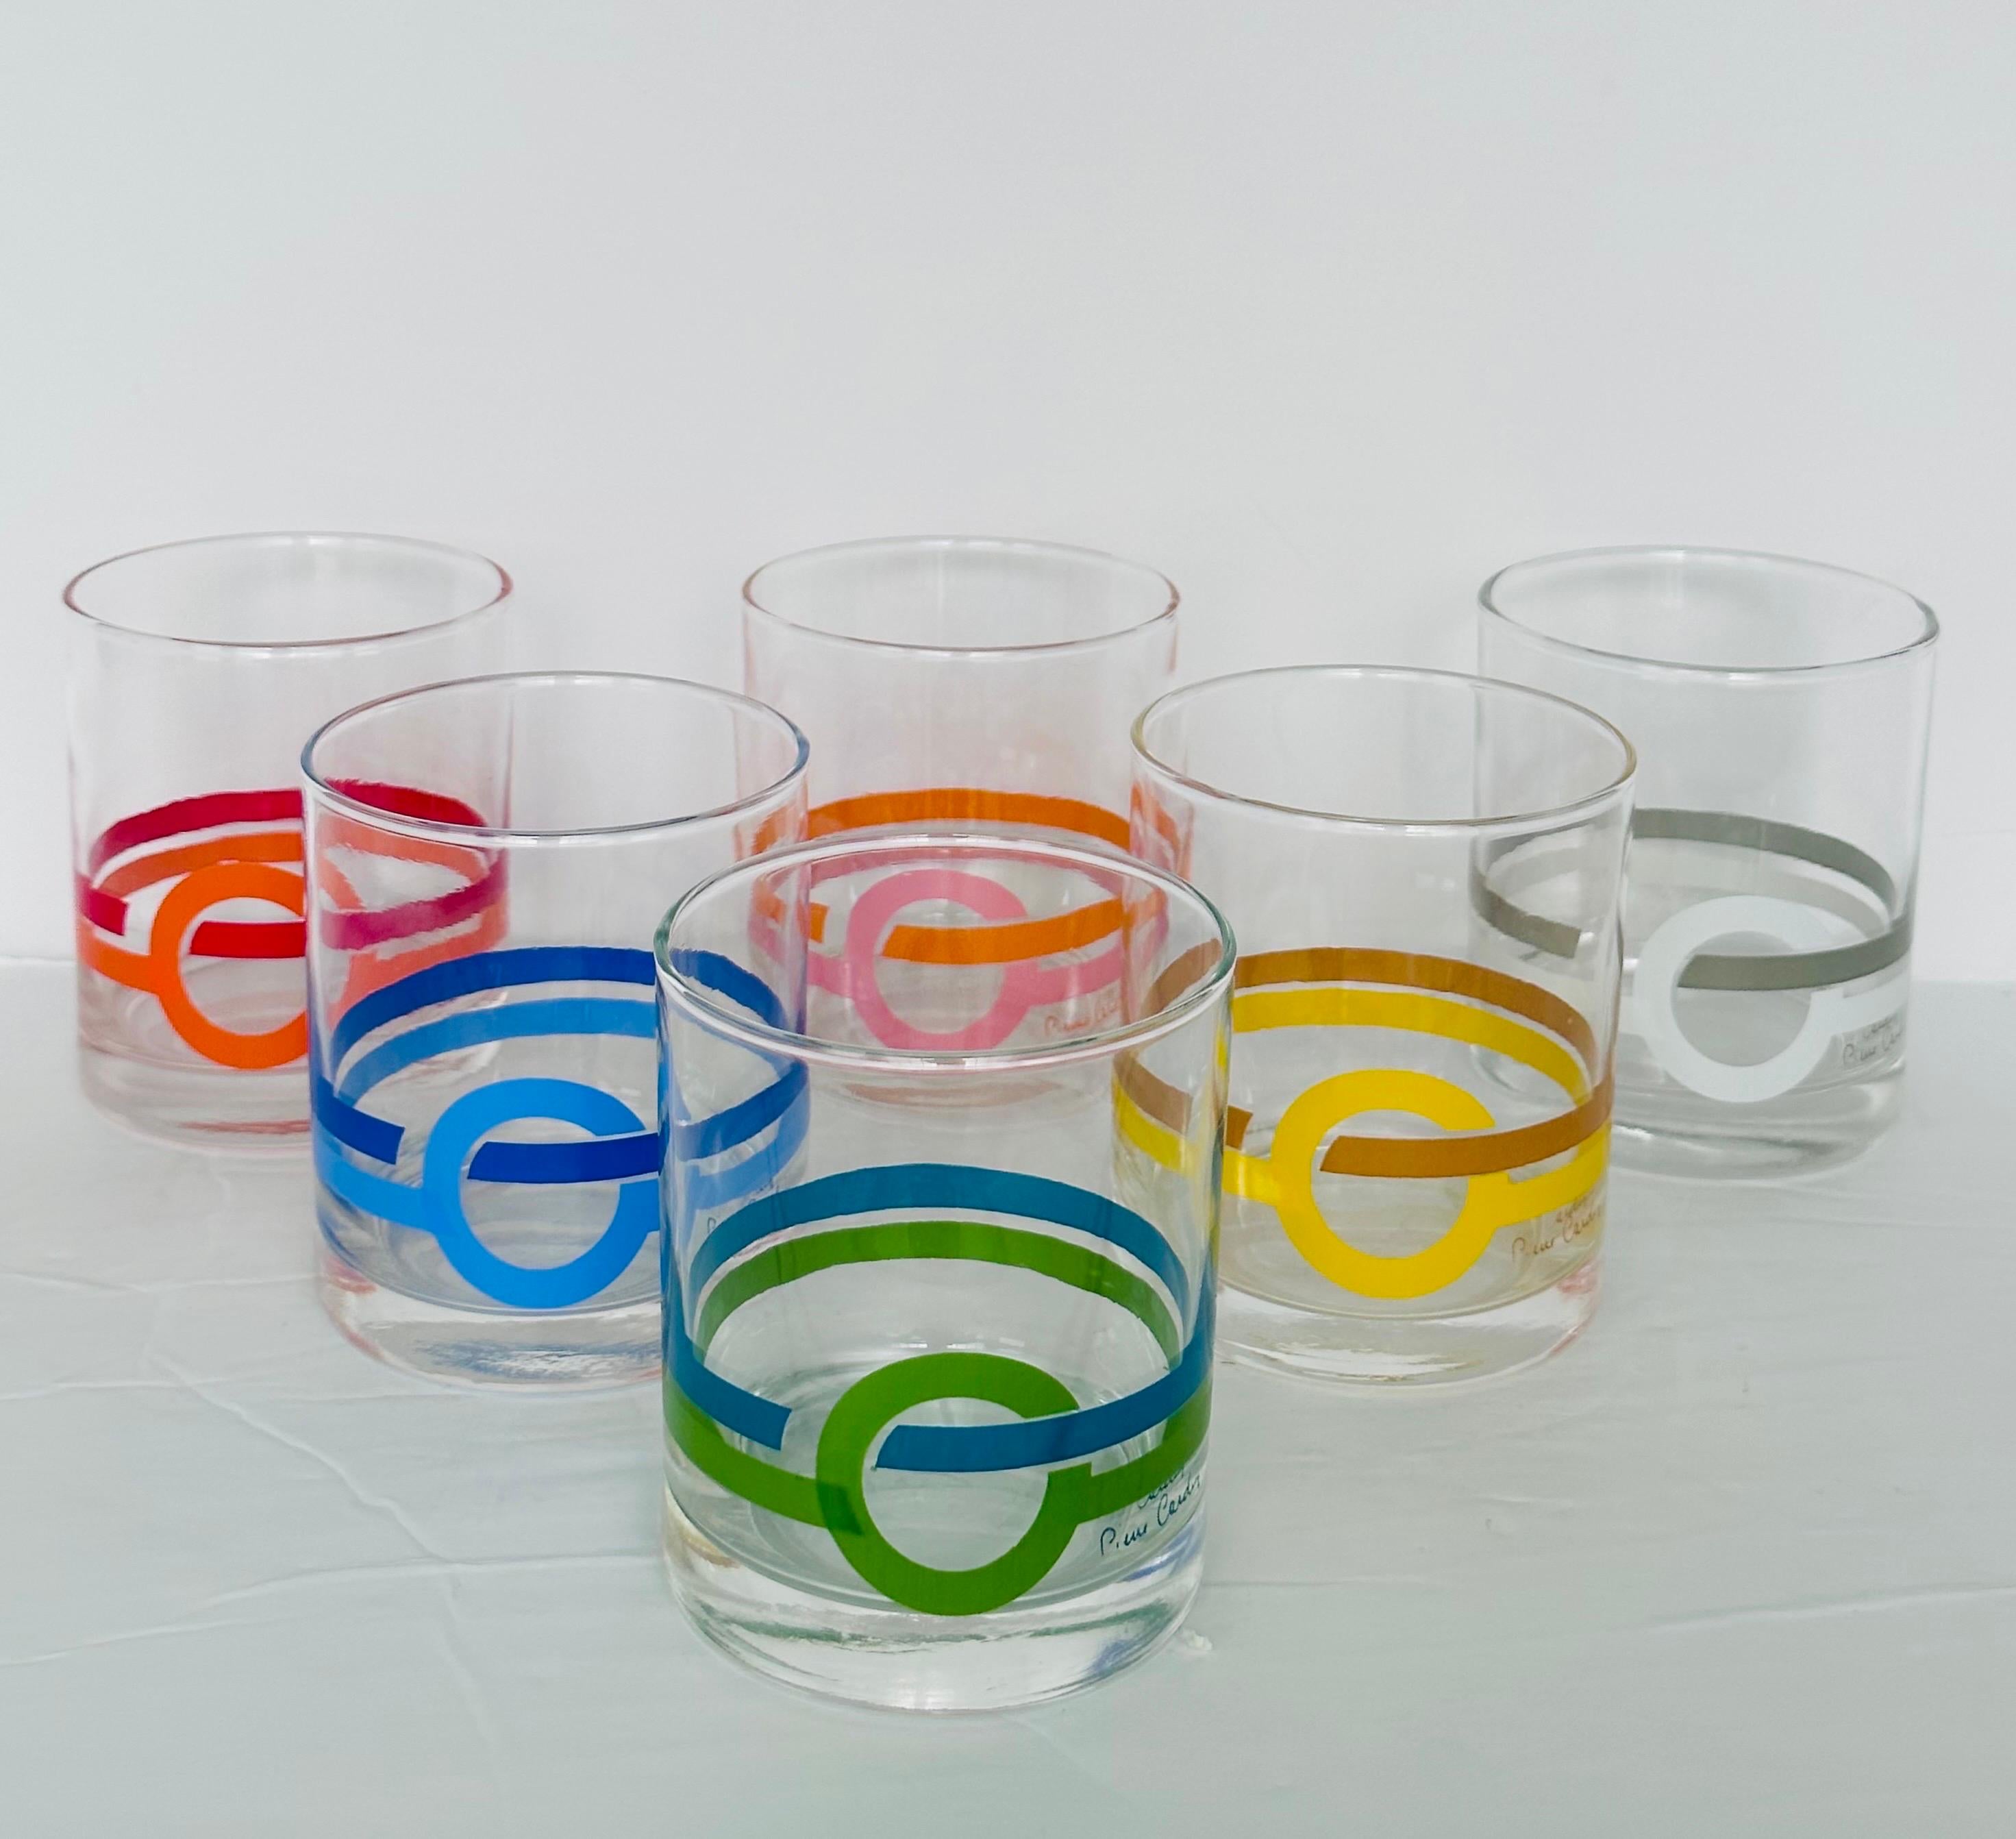 We are very pleased to offer a set of six exquisite tumbler glasses crafted by the legendary French fashion designer Pierre Cardin, circa the 1970s.  Each Sasaki glass is a testament to his iconic design sensibility.  The geometric and color